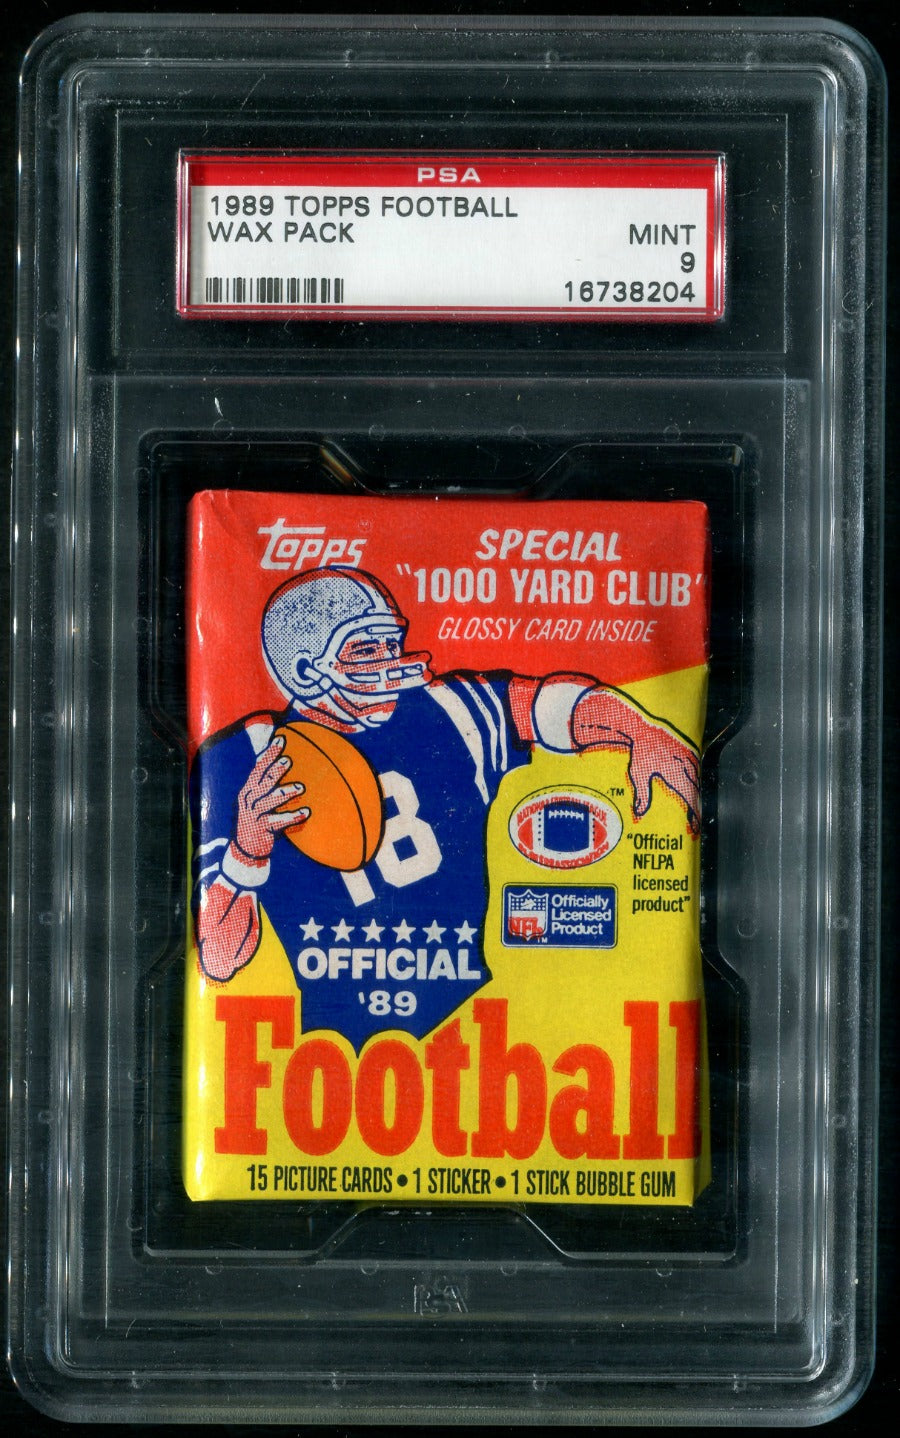 1989 Topps Football Unopened Wax Pack PSA MINT 9